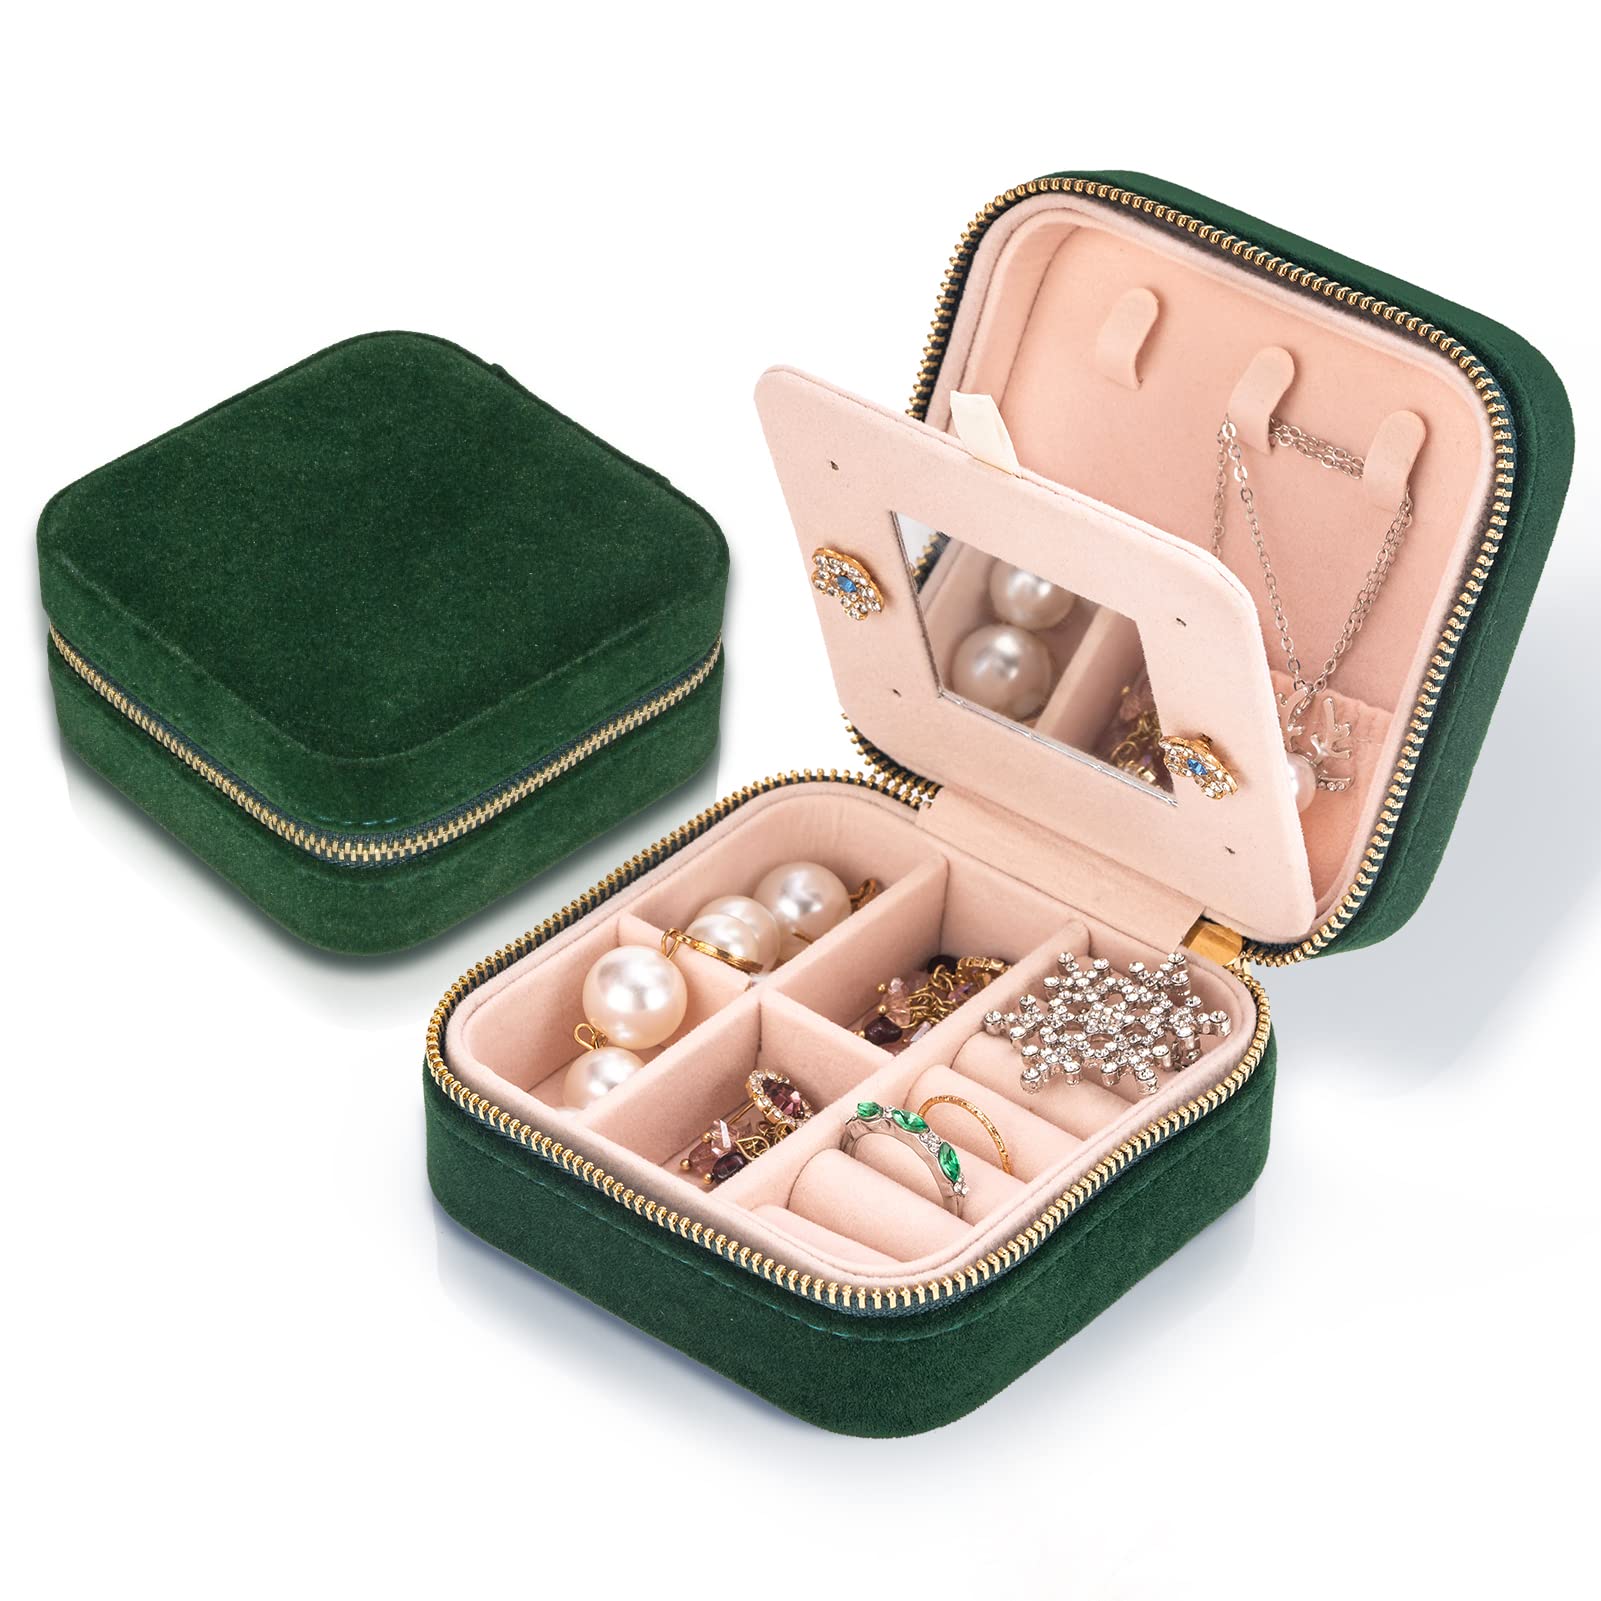 Do you know 5 types of commonly used jewelry packaging boxes?